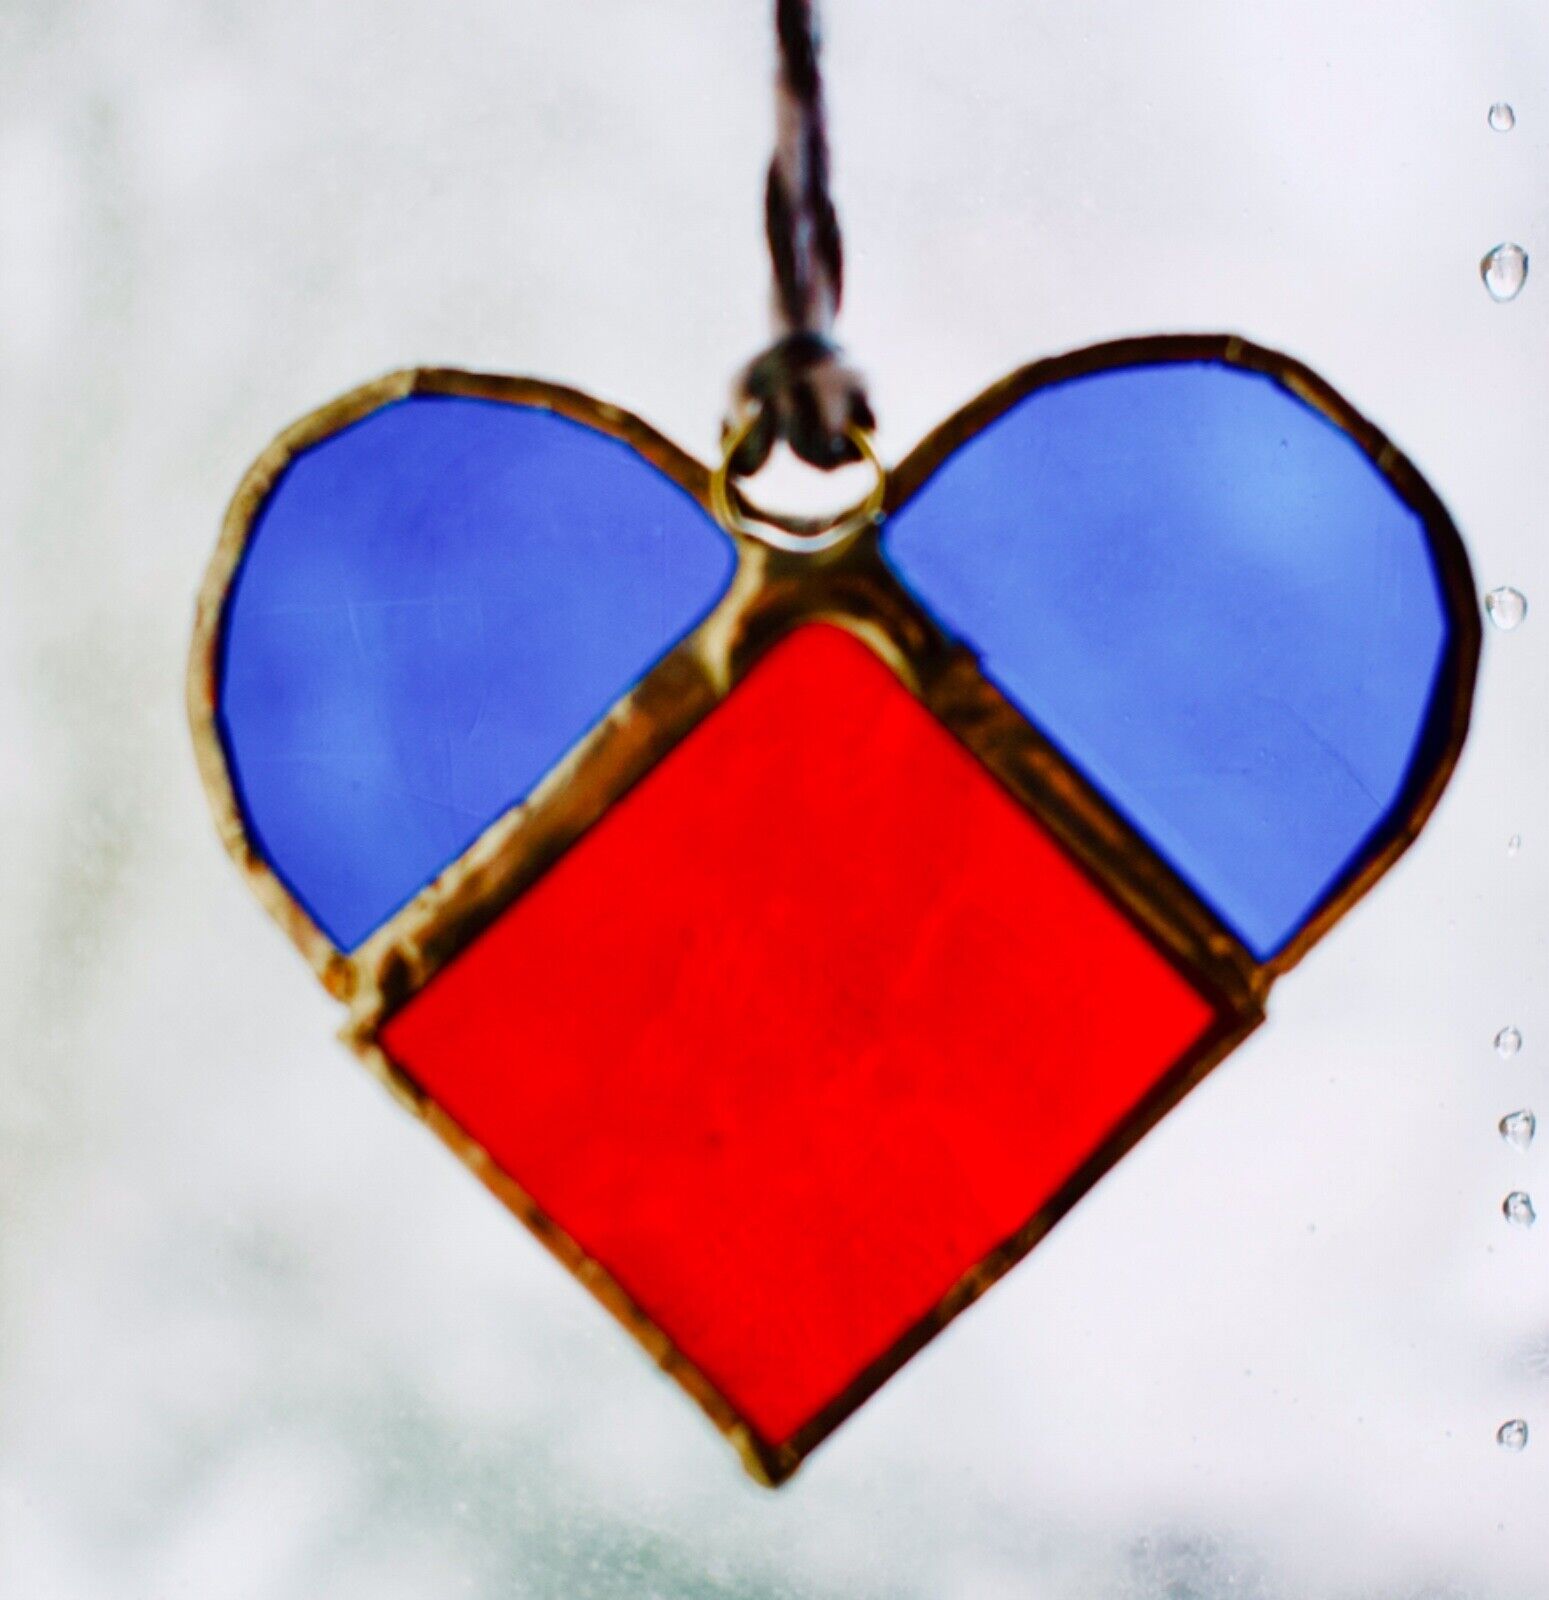 Hand made stained glass heart suncatcher. Send some love this Va